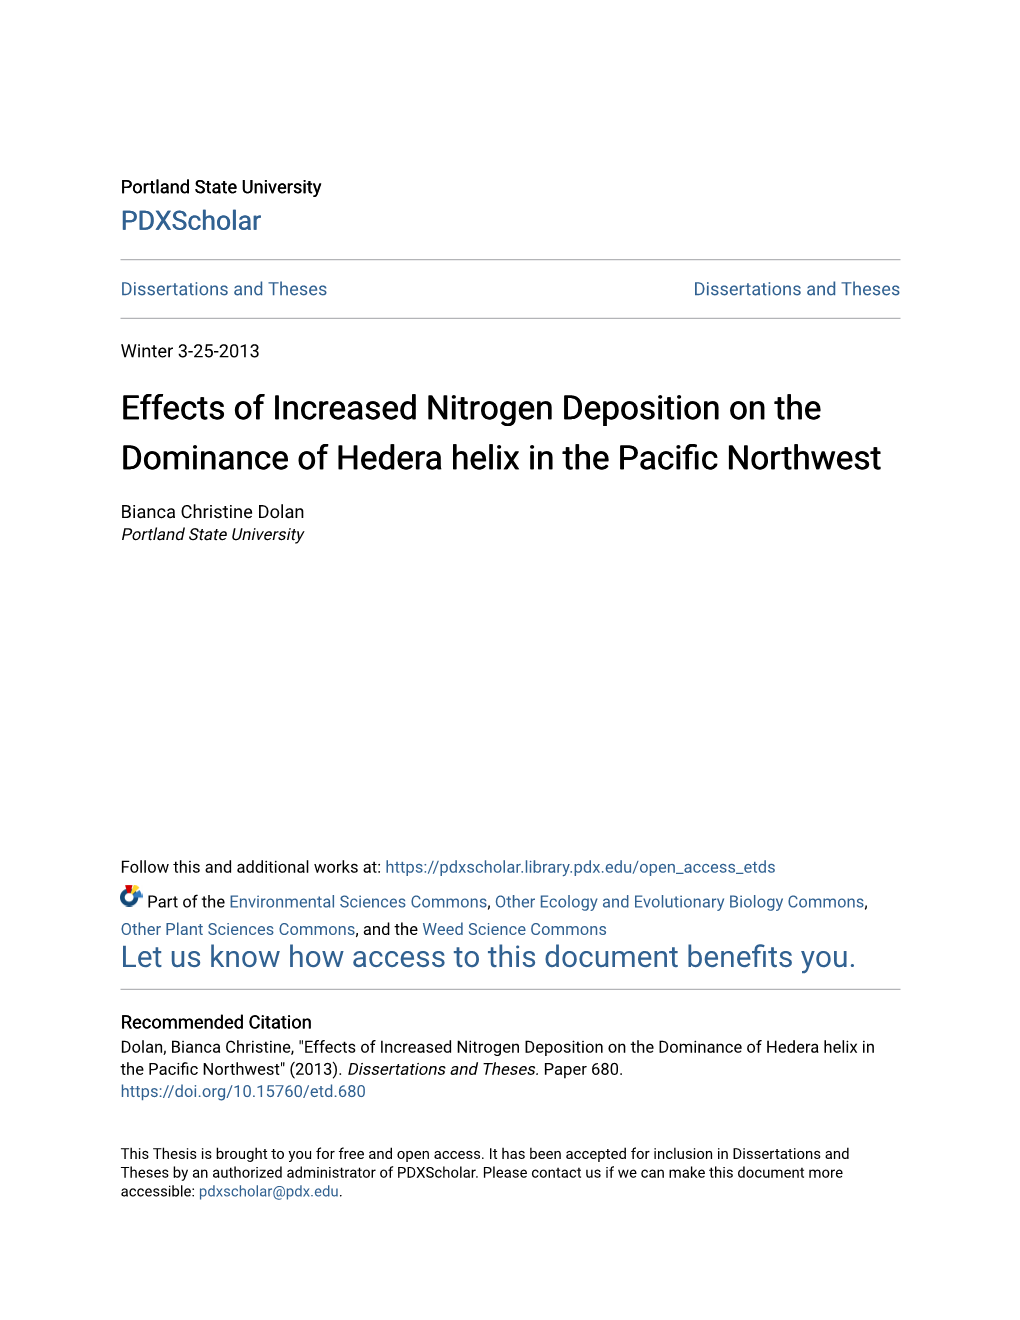 Effects of Increased Nitrogen Deposition on the Dominance of Hedera Helix in the Pacific Northwest